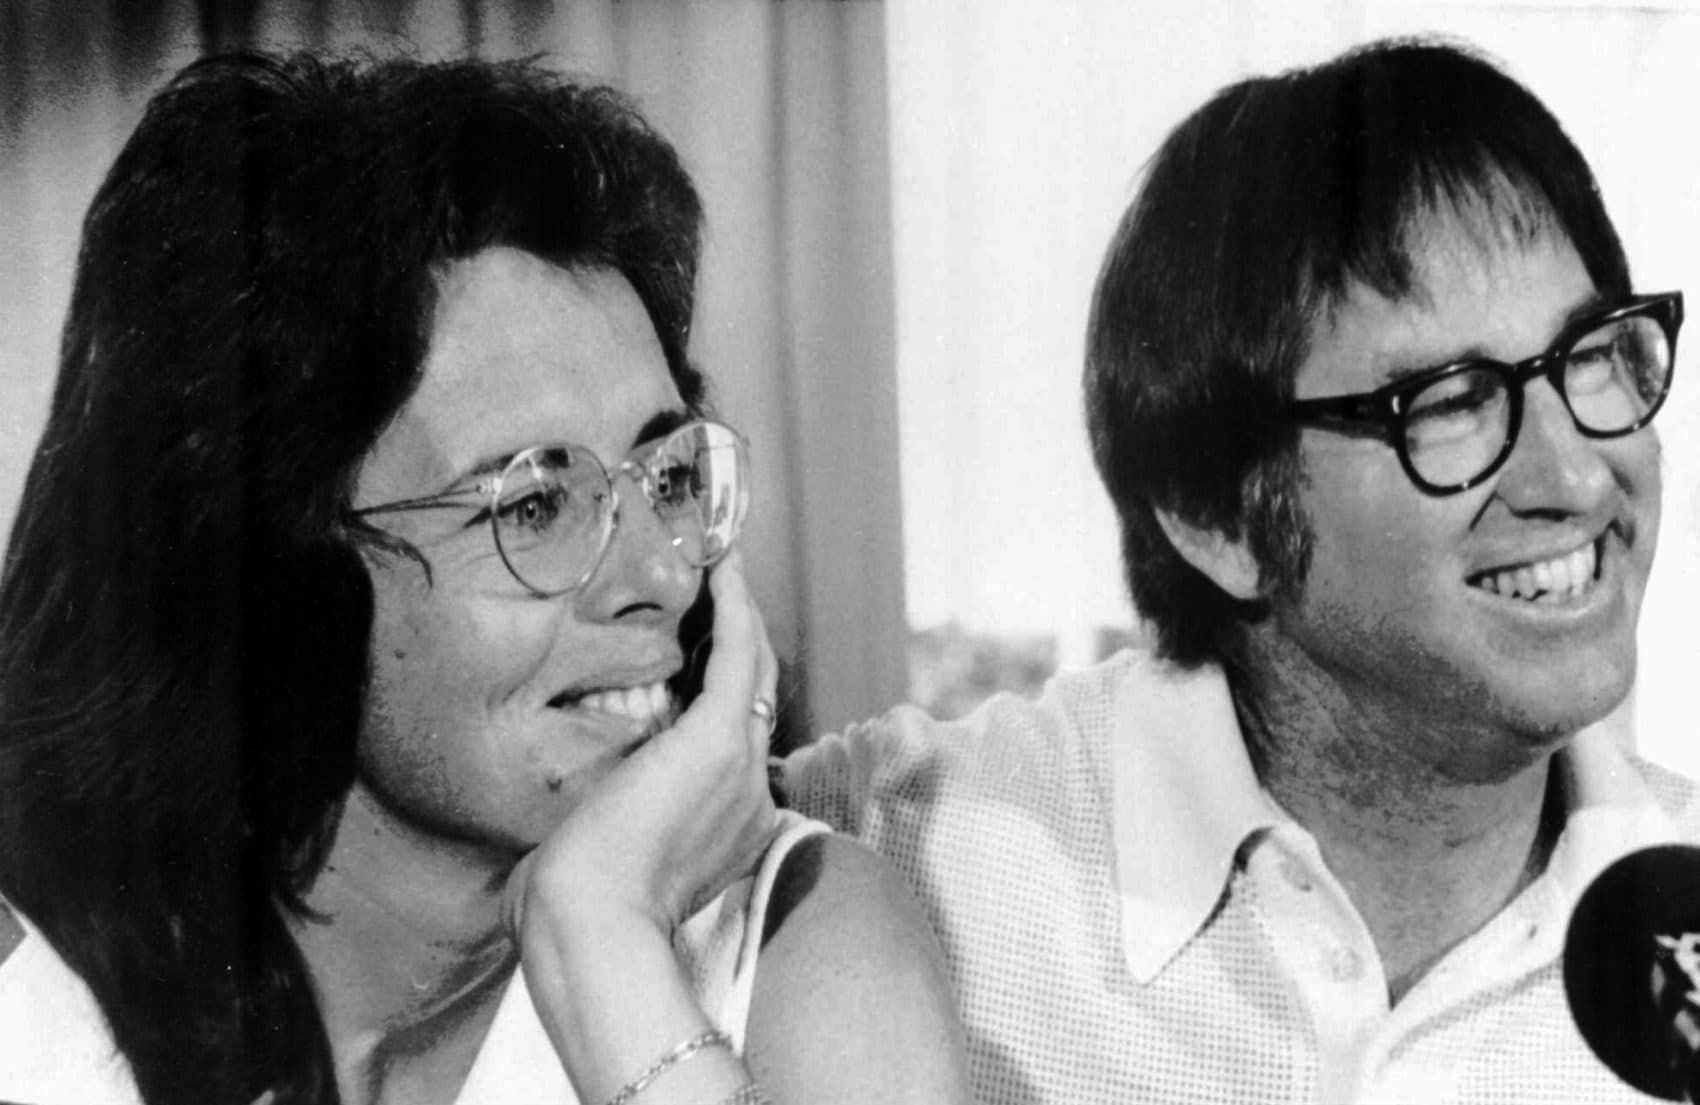 Littlefield: The Battle Of The Sexes Hits The Box Office